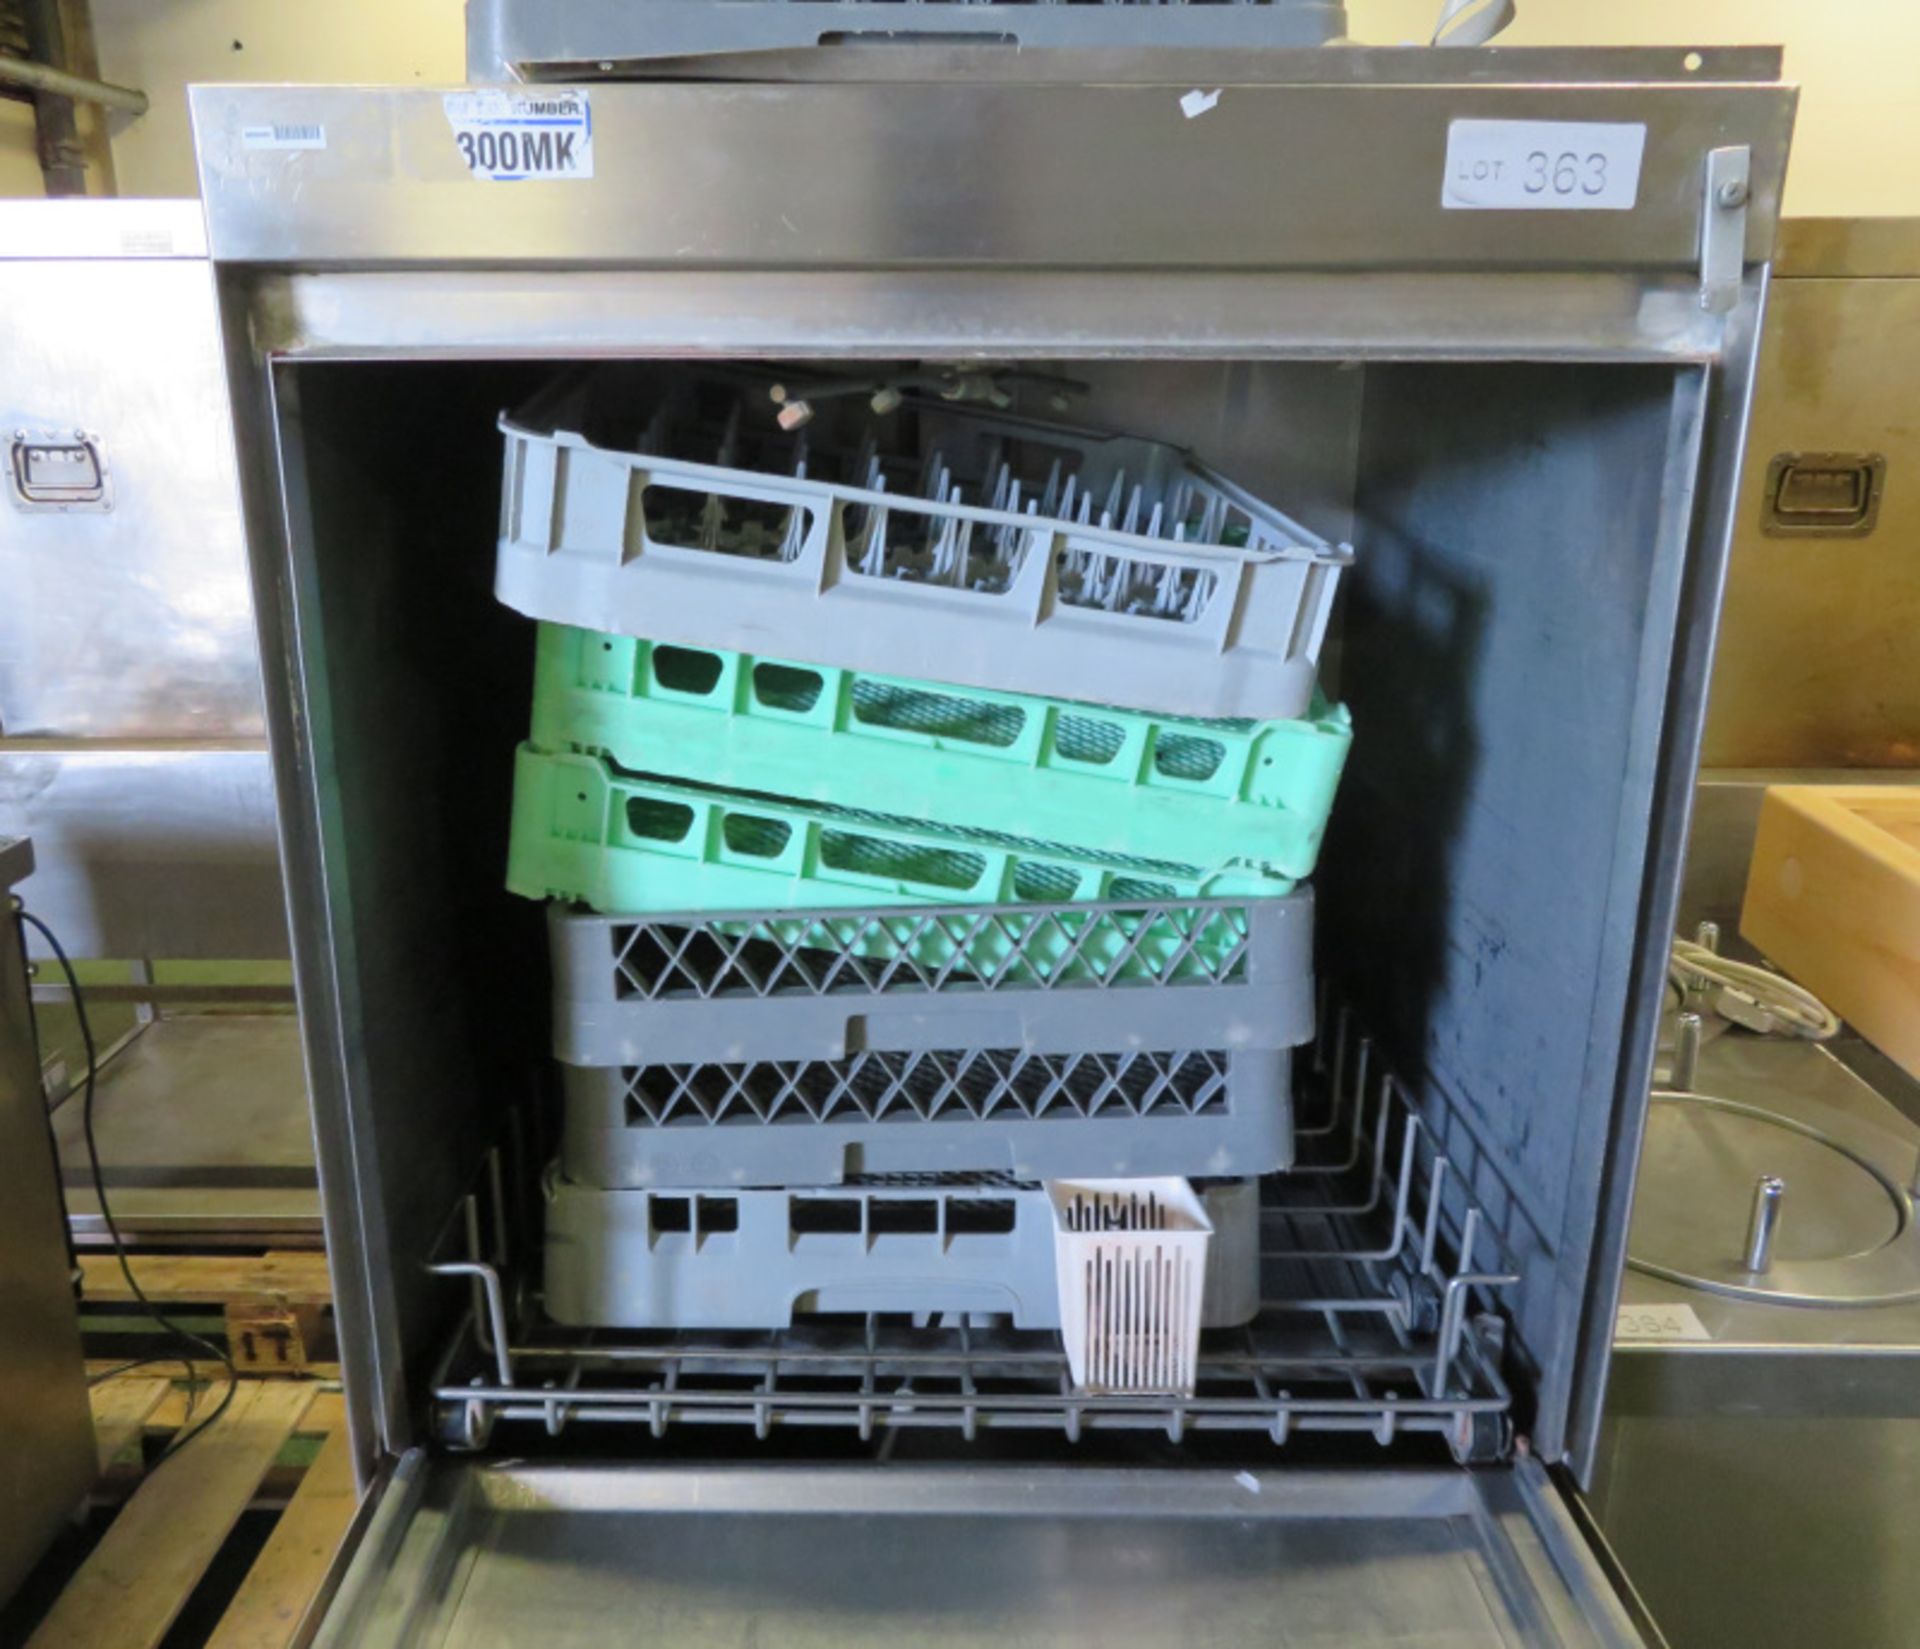 Meiko FV130B FA Dishwasher 14kw 400v L 740mm x W 800mm x H 1600mm - Image 5 of 6